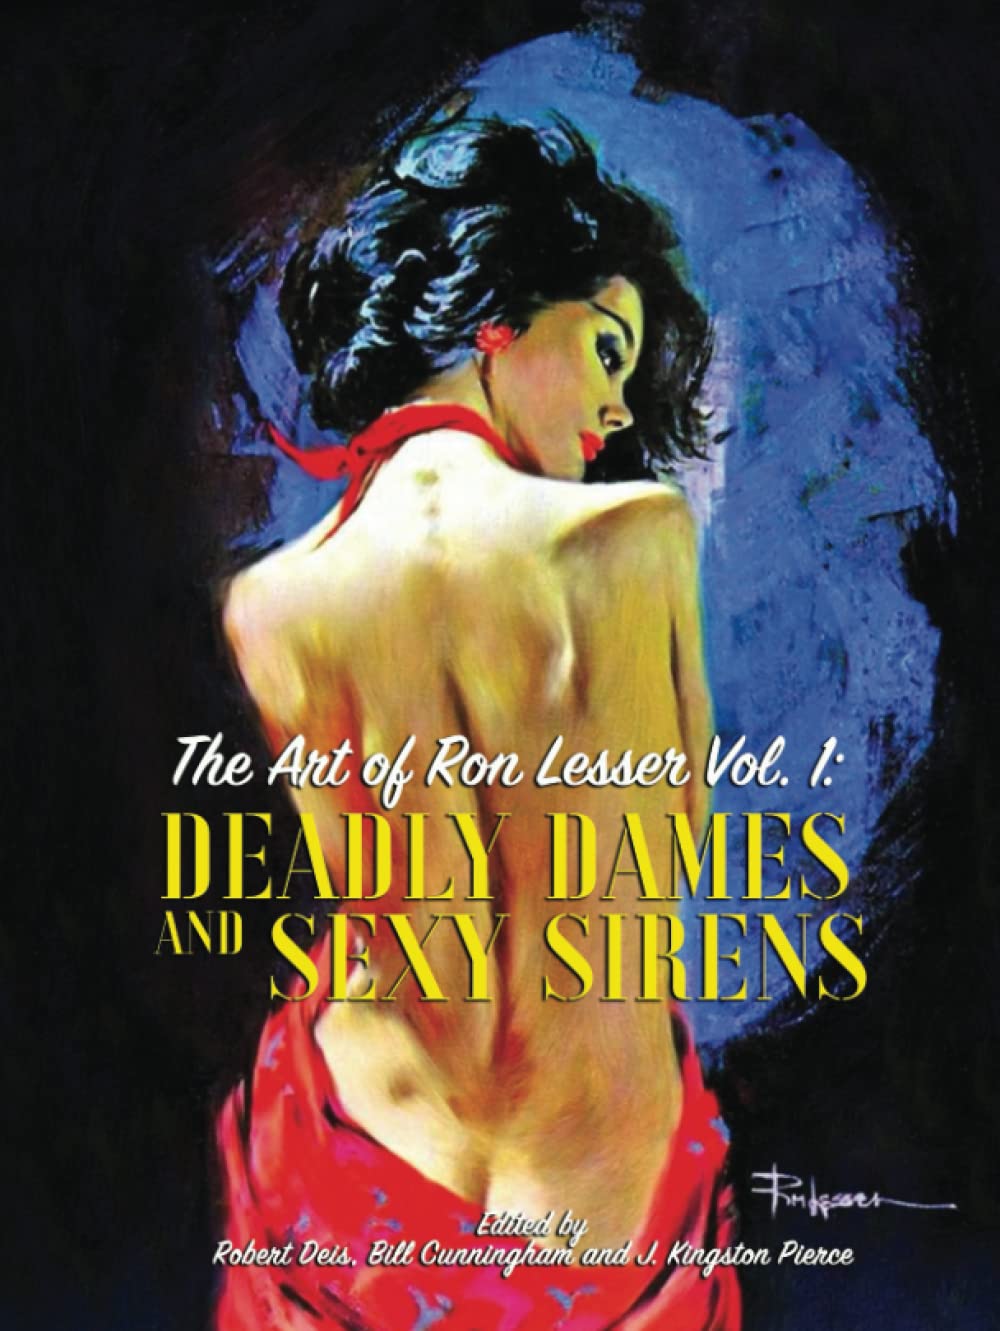 The Art of Ron Lesser Vol. 1: Deadly Dames and Sexy Sirens